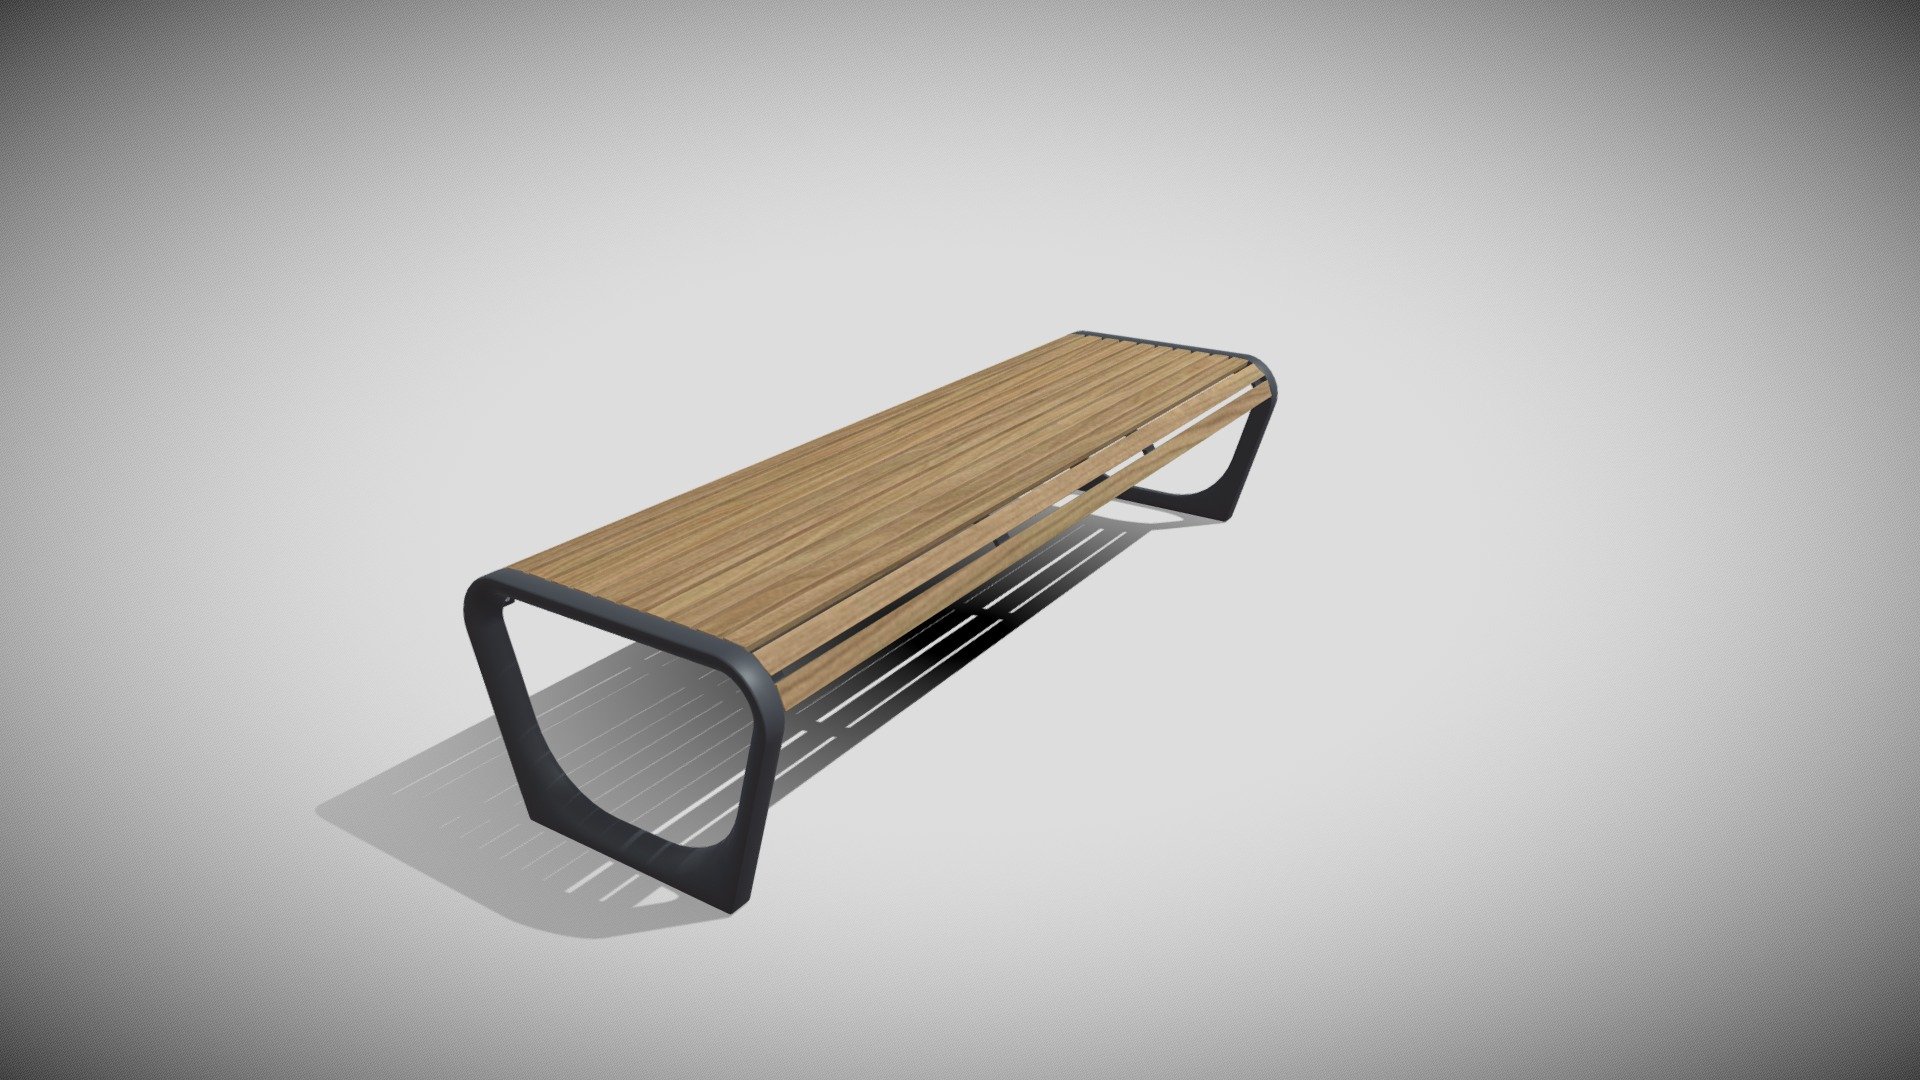 Detailed model of a Park Bench, modeled in Cinema 4D.The model was created using approximate real world dimensions.

The model has 12,856 polys and 12,372 vertices.

An additional file has been provided containing the original Cinema 4D project file, textures and other 3d export files such as 3ds, fbx and obj 3d model